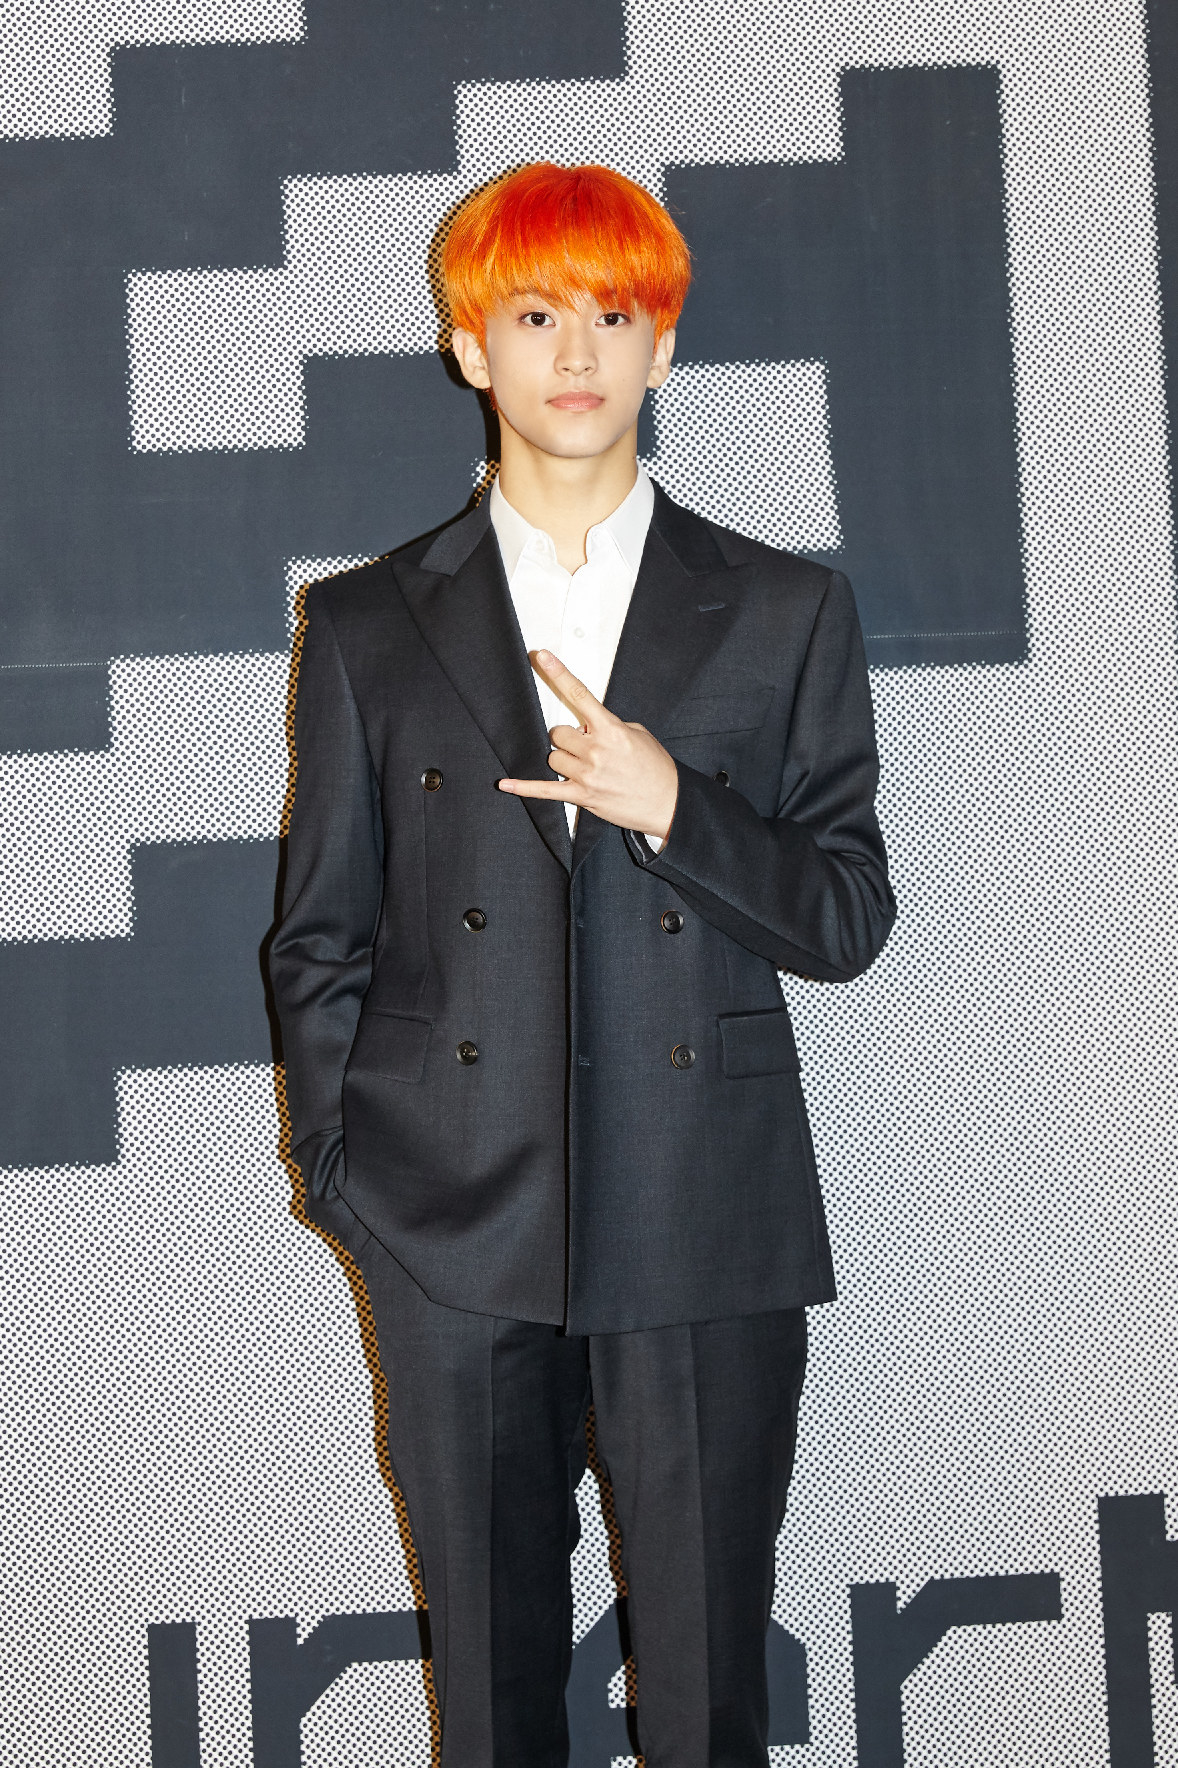 Mark Lee poses in a pressed suit